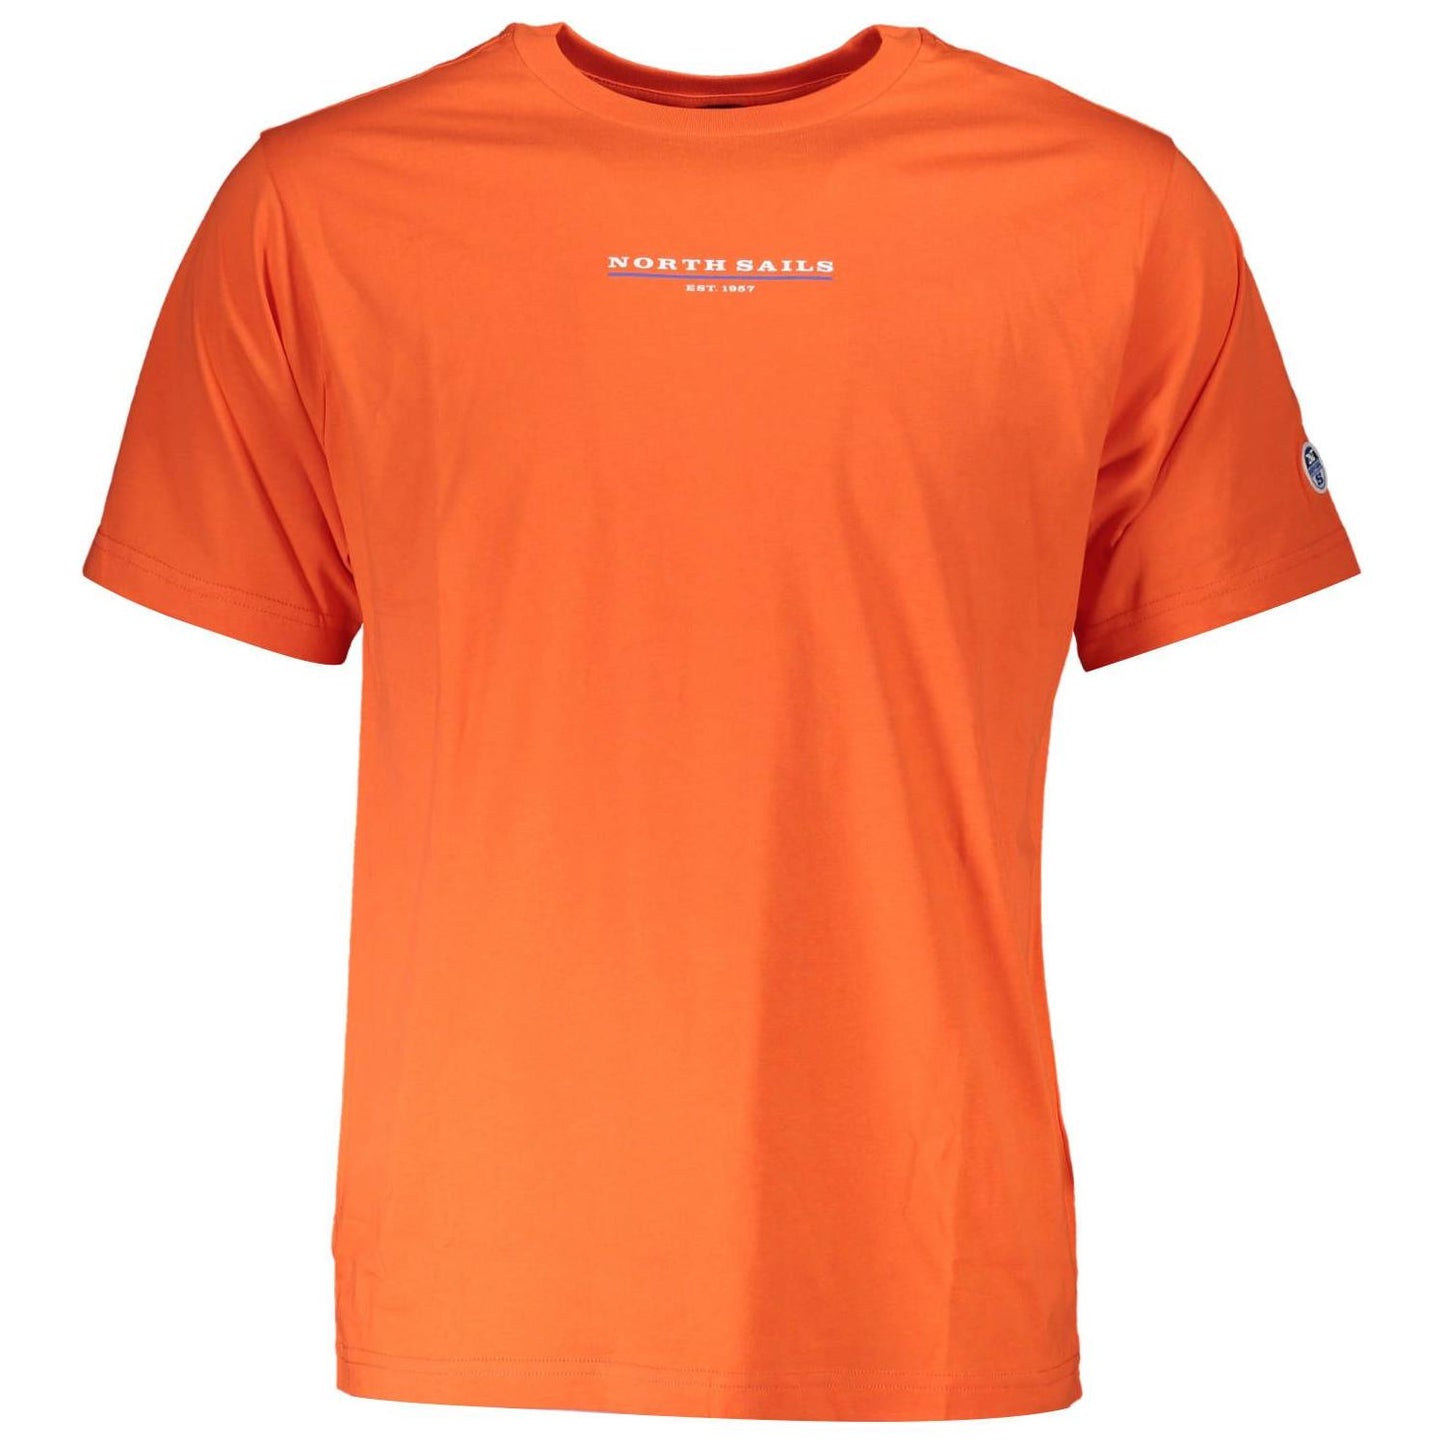 North Sails Organic Cotton Comfort Fit Tee in Orange organic-cotton-comfort-fit-tee-in-orange